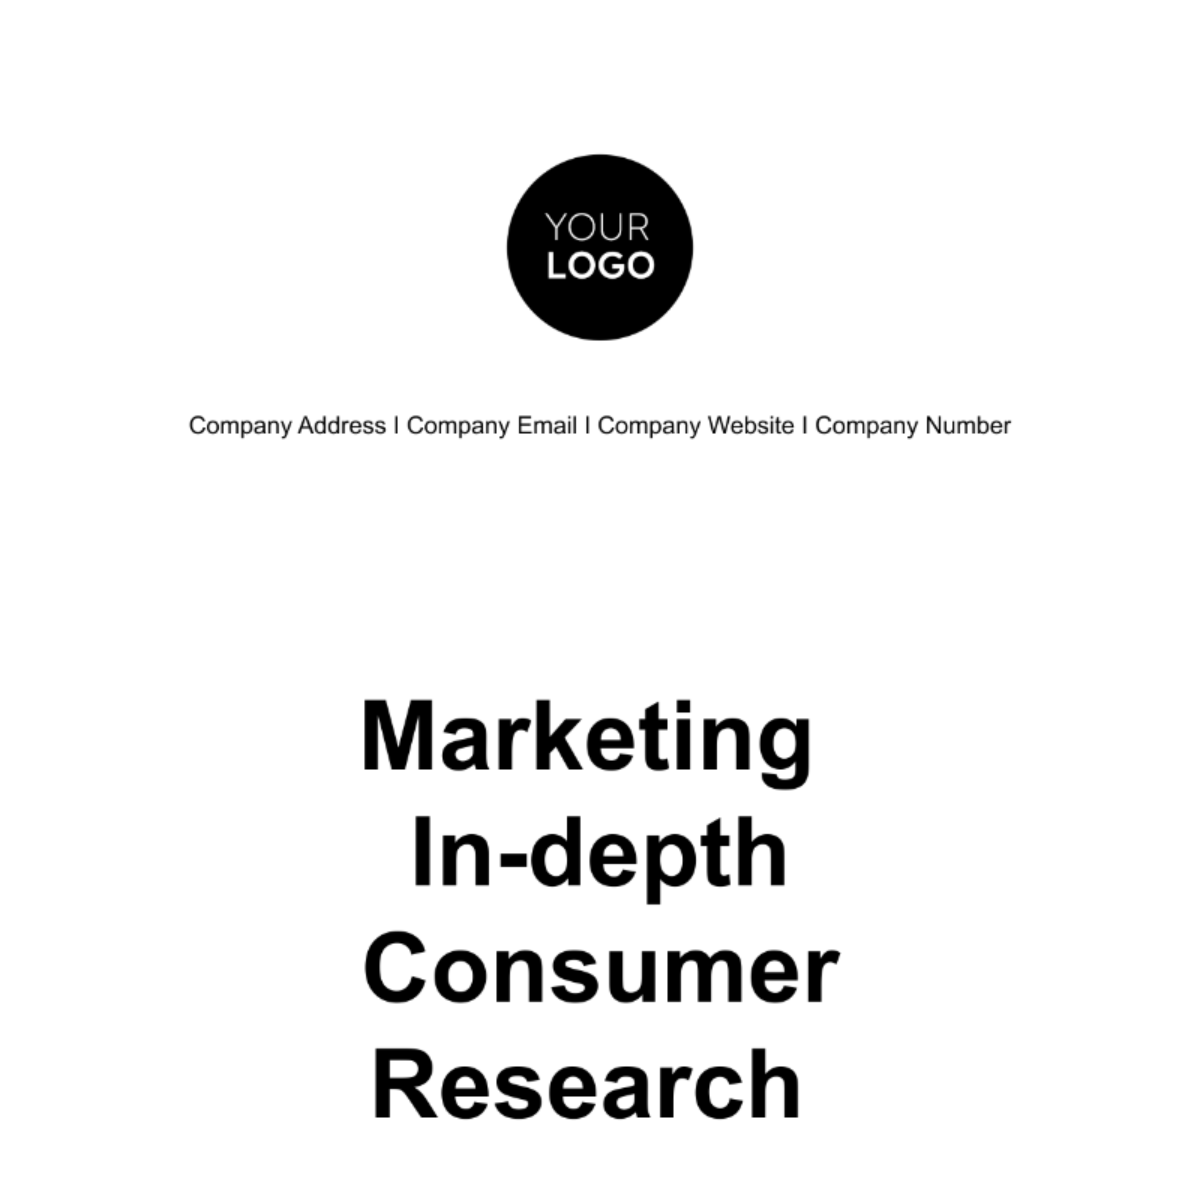 Marketing In-depth Consumer Research Template